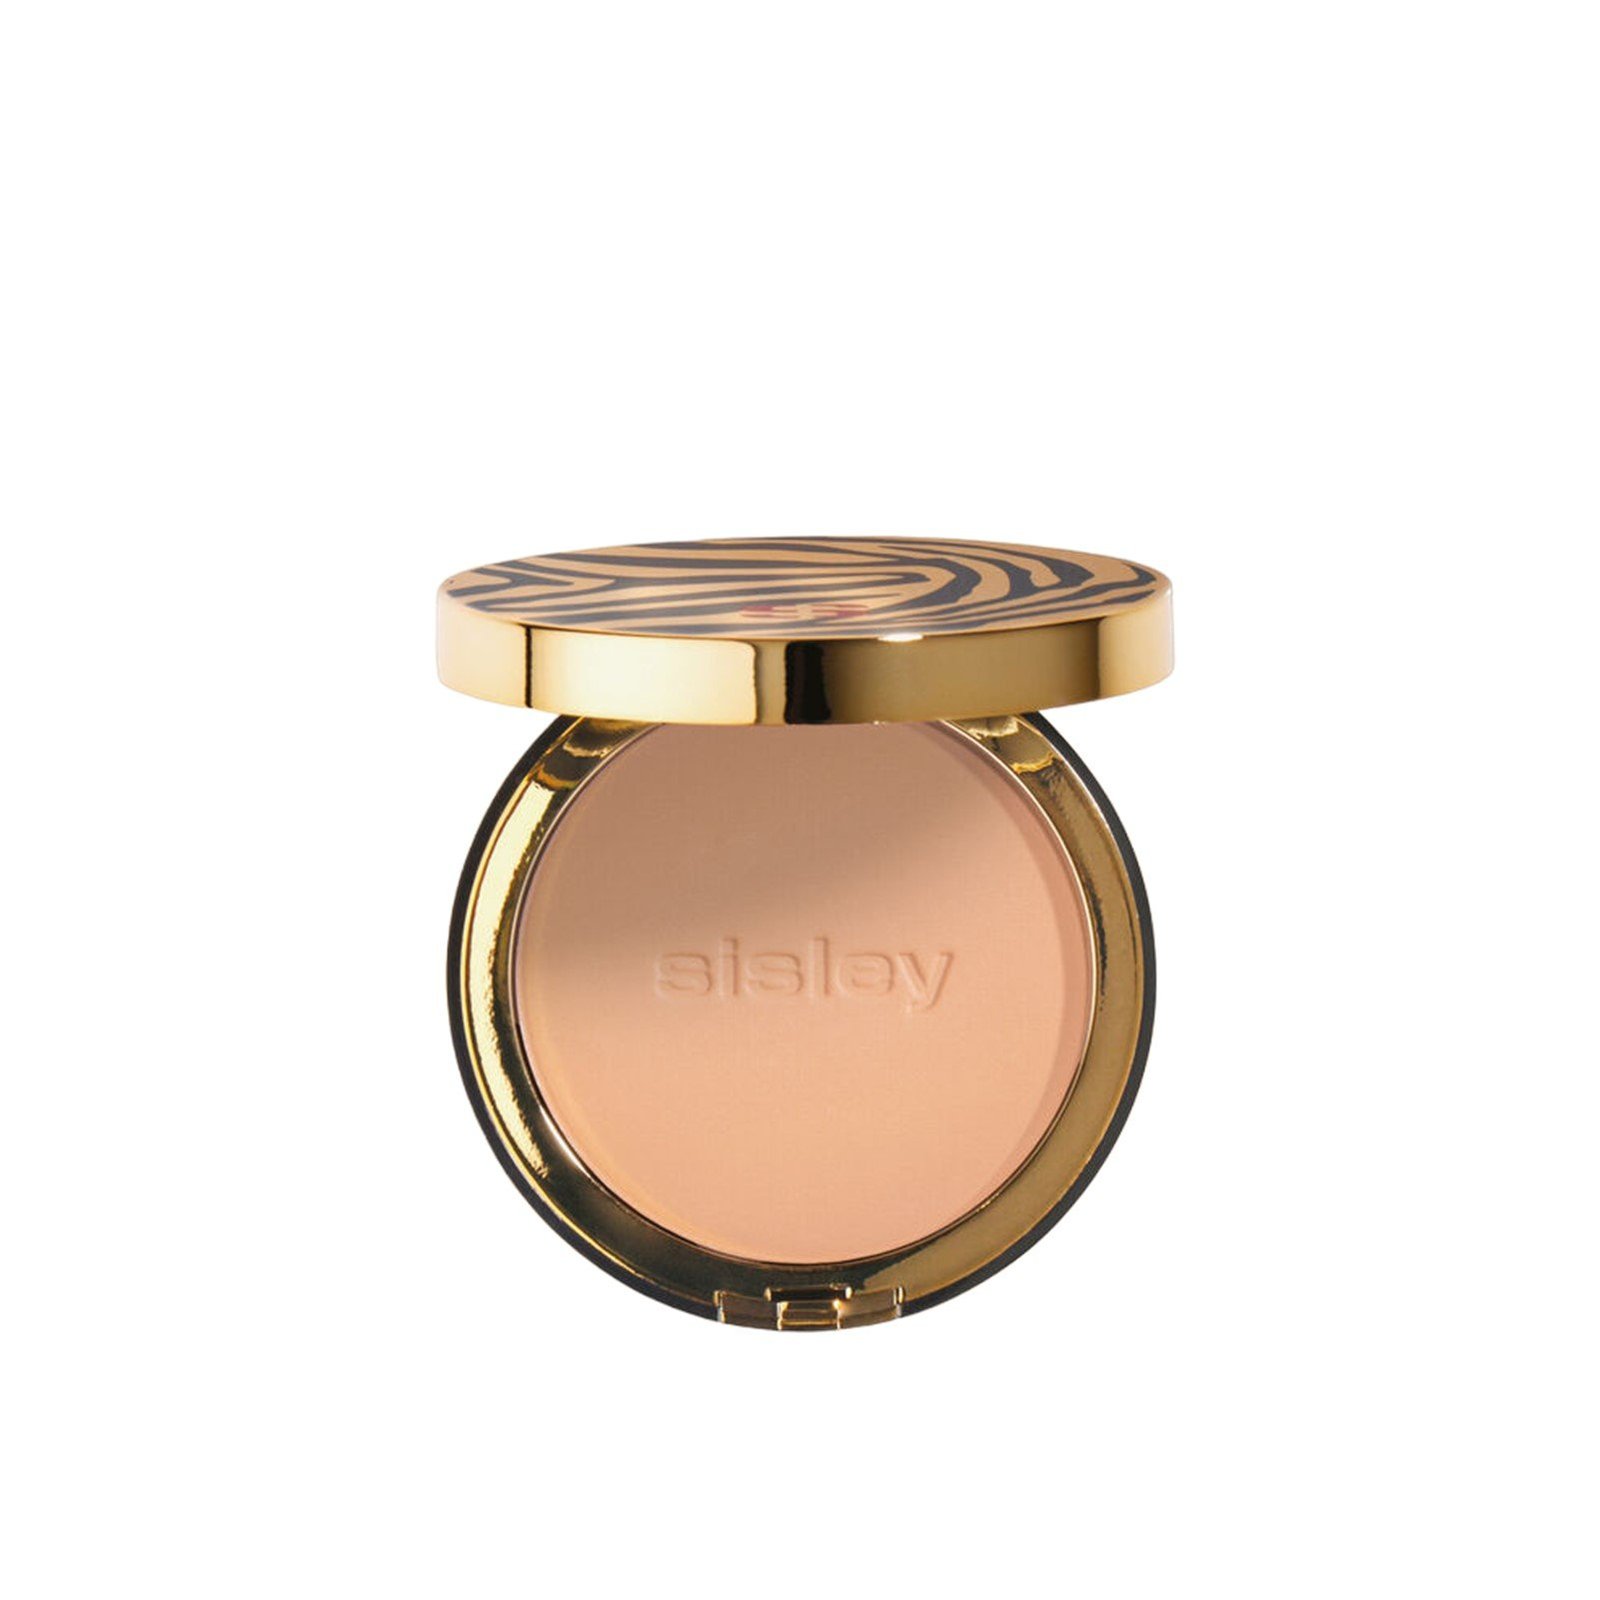 Sisley Paris Phyto-Poudre Compacte Matifying And Beautifying Pressed Powder 3 Sandy 12g (0.42 oz)